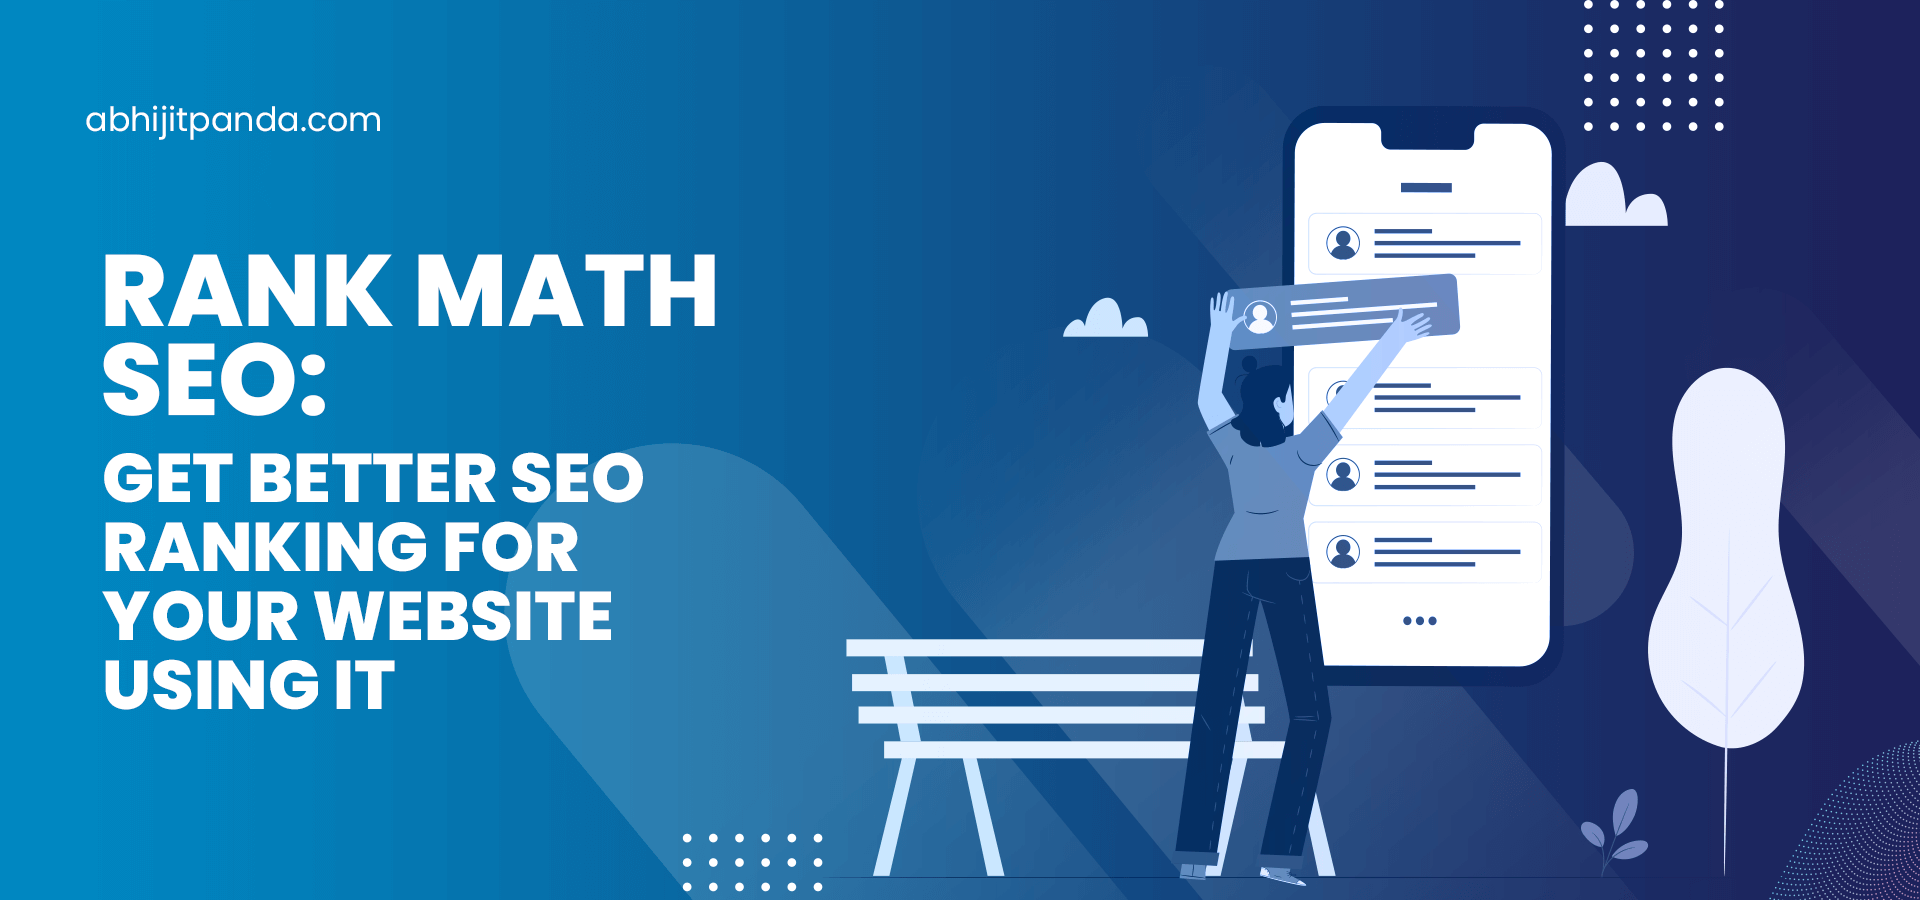 Rank Math SEO - Get Better SEO Ranking for Your Website Using It